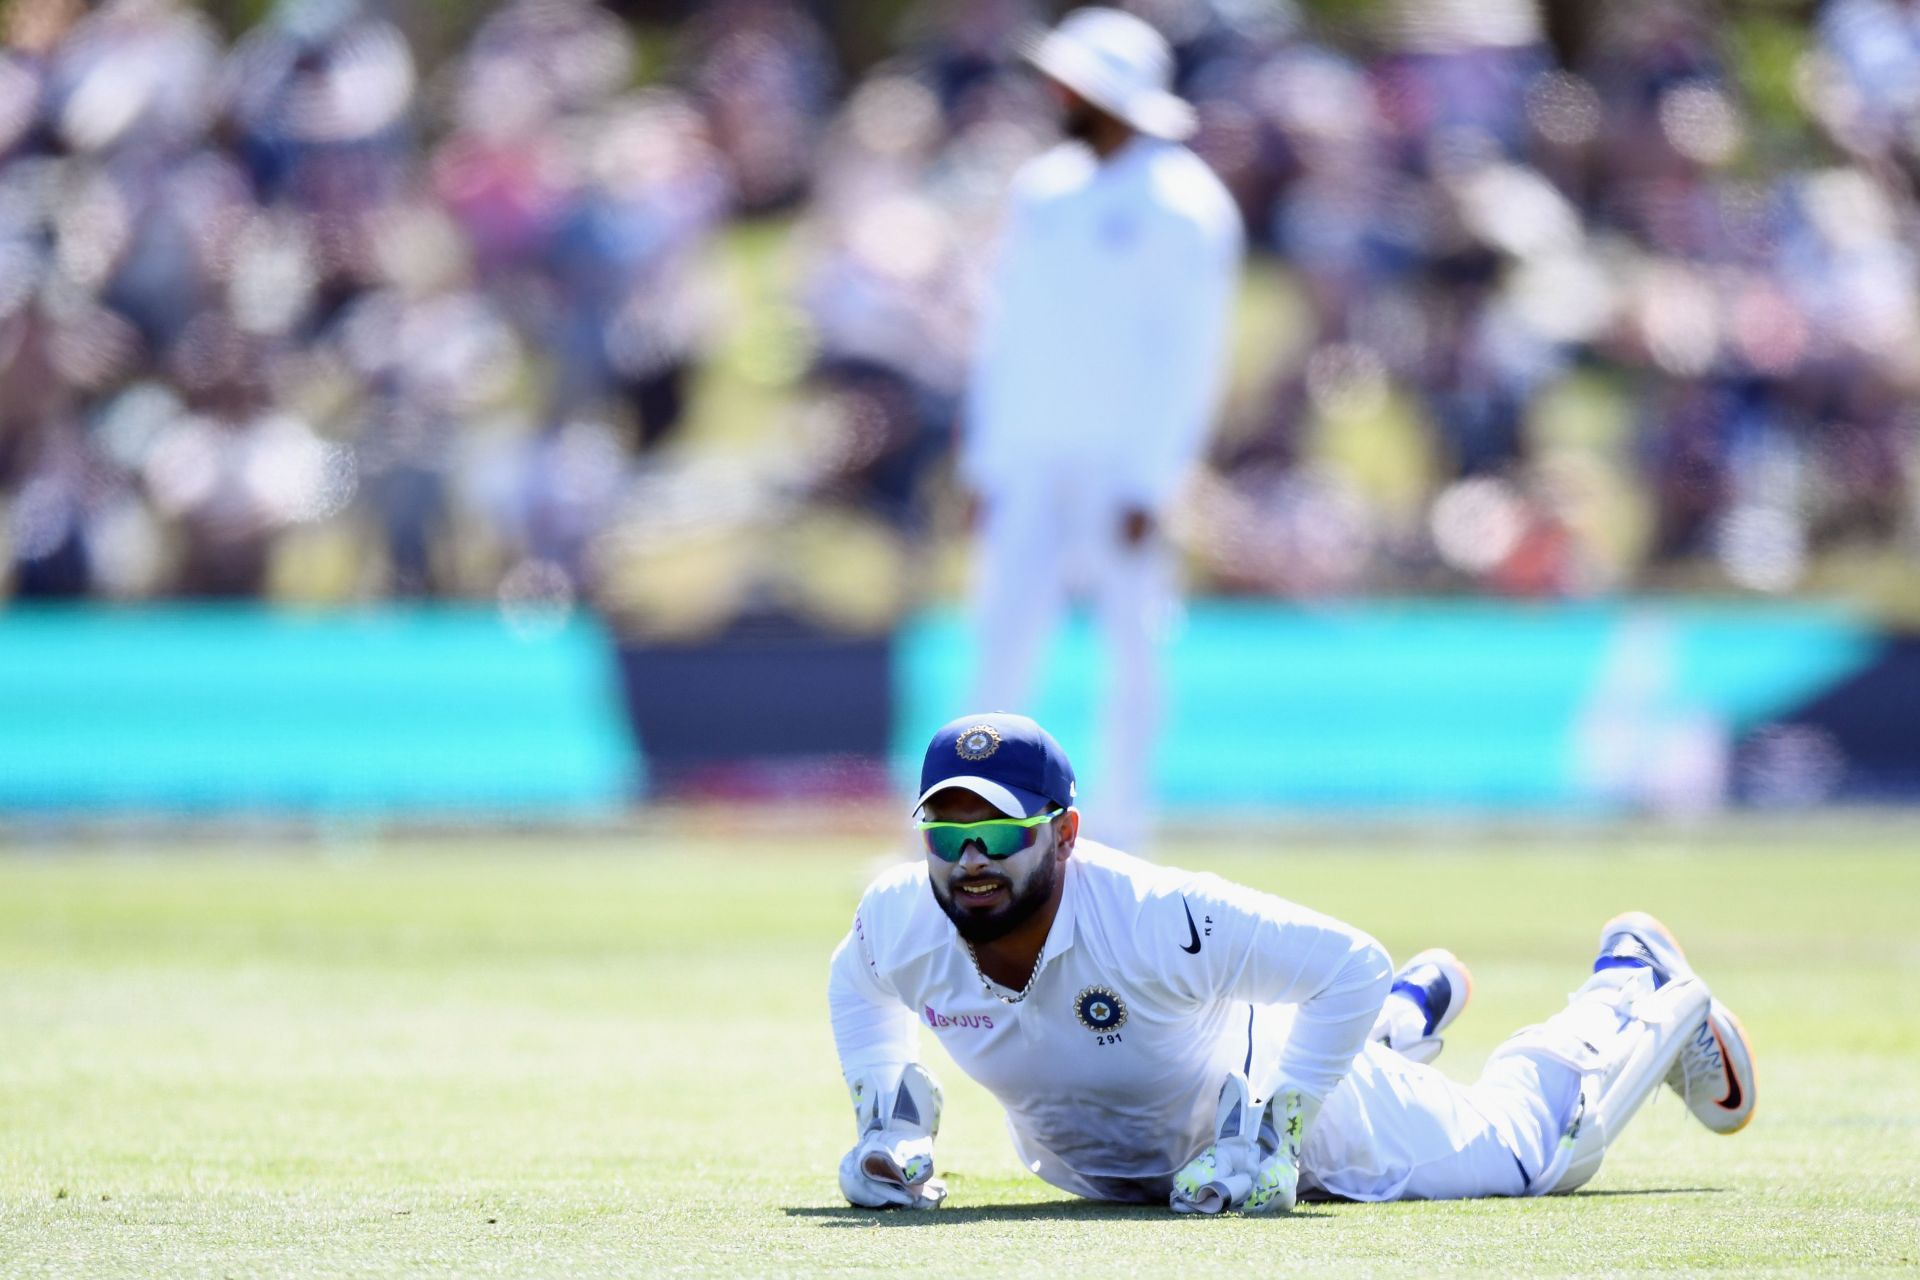 New Zealand v India - Second Test: Day 2